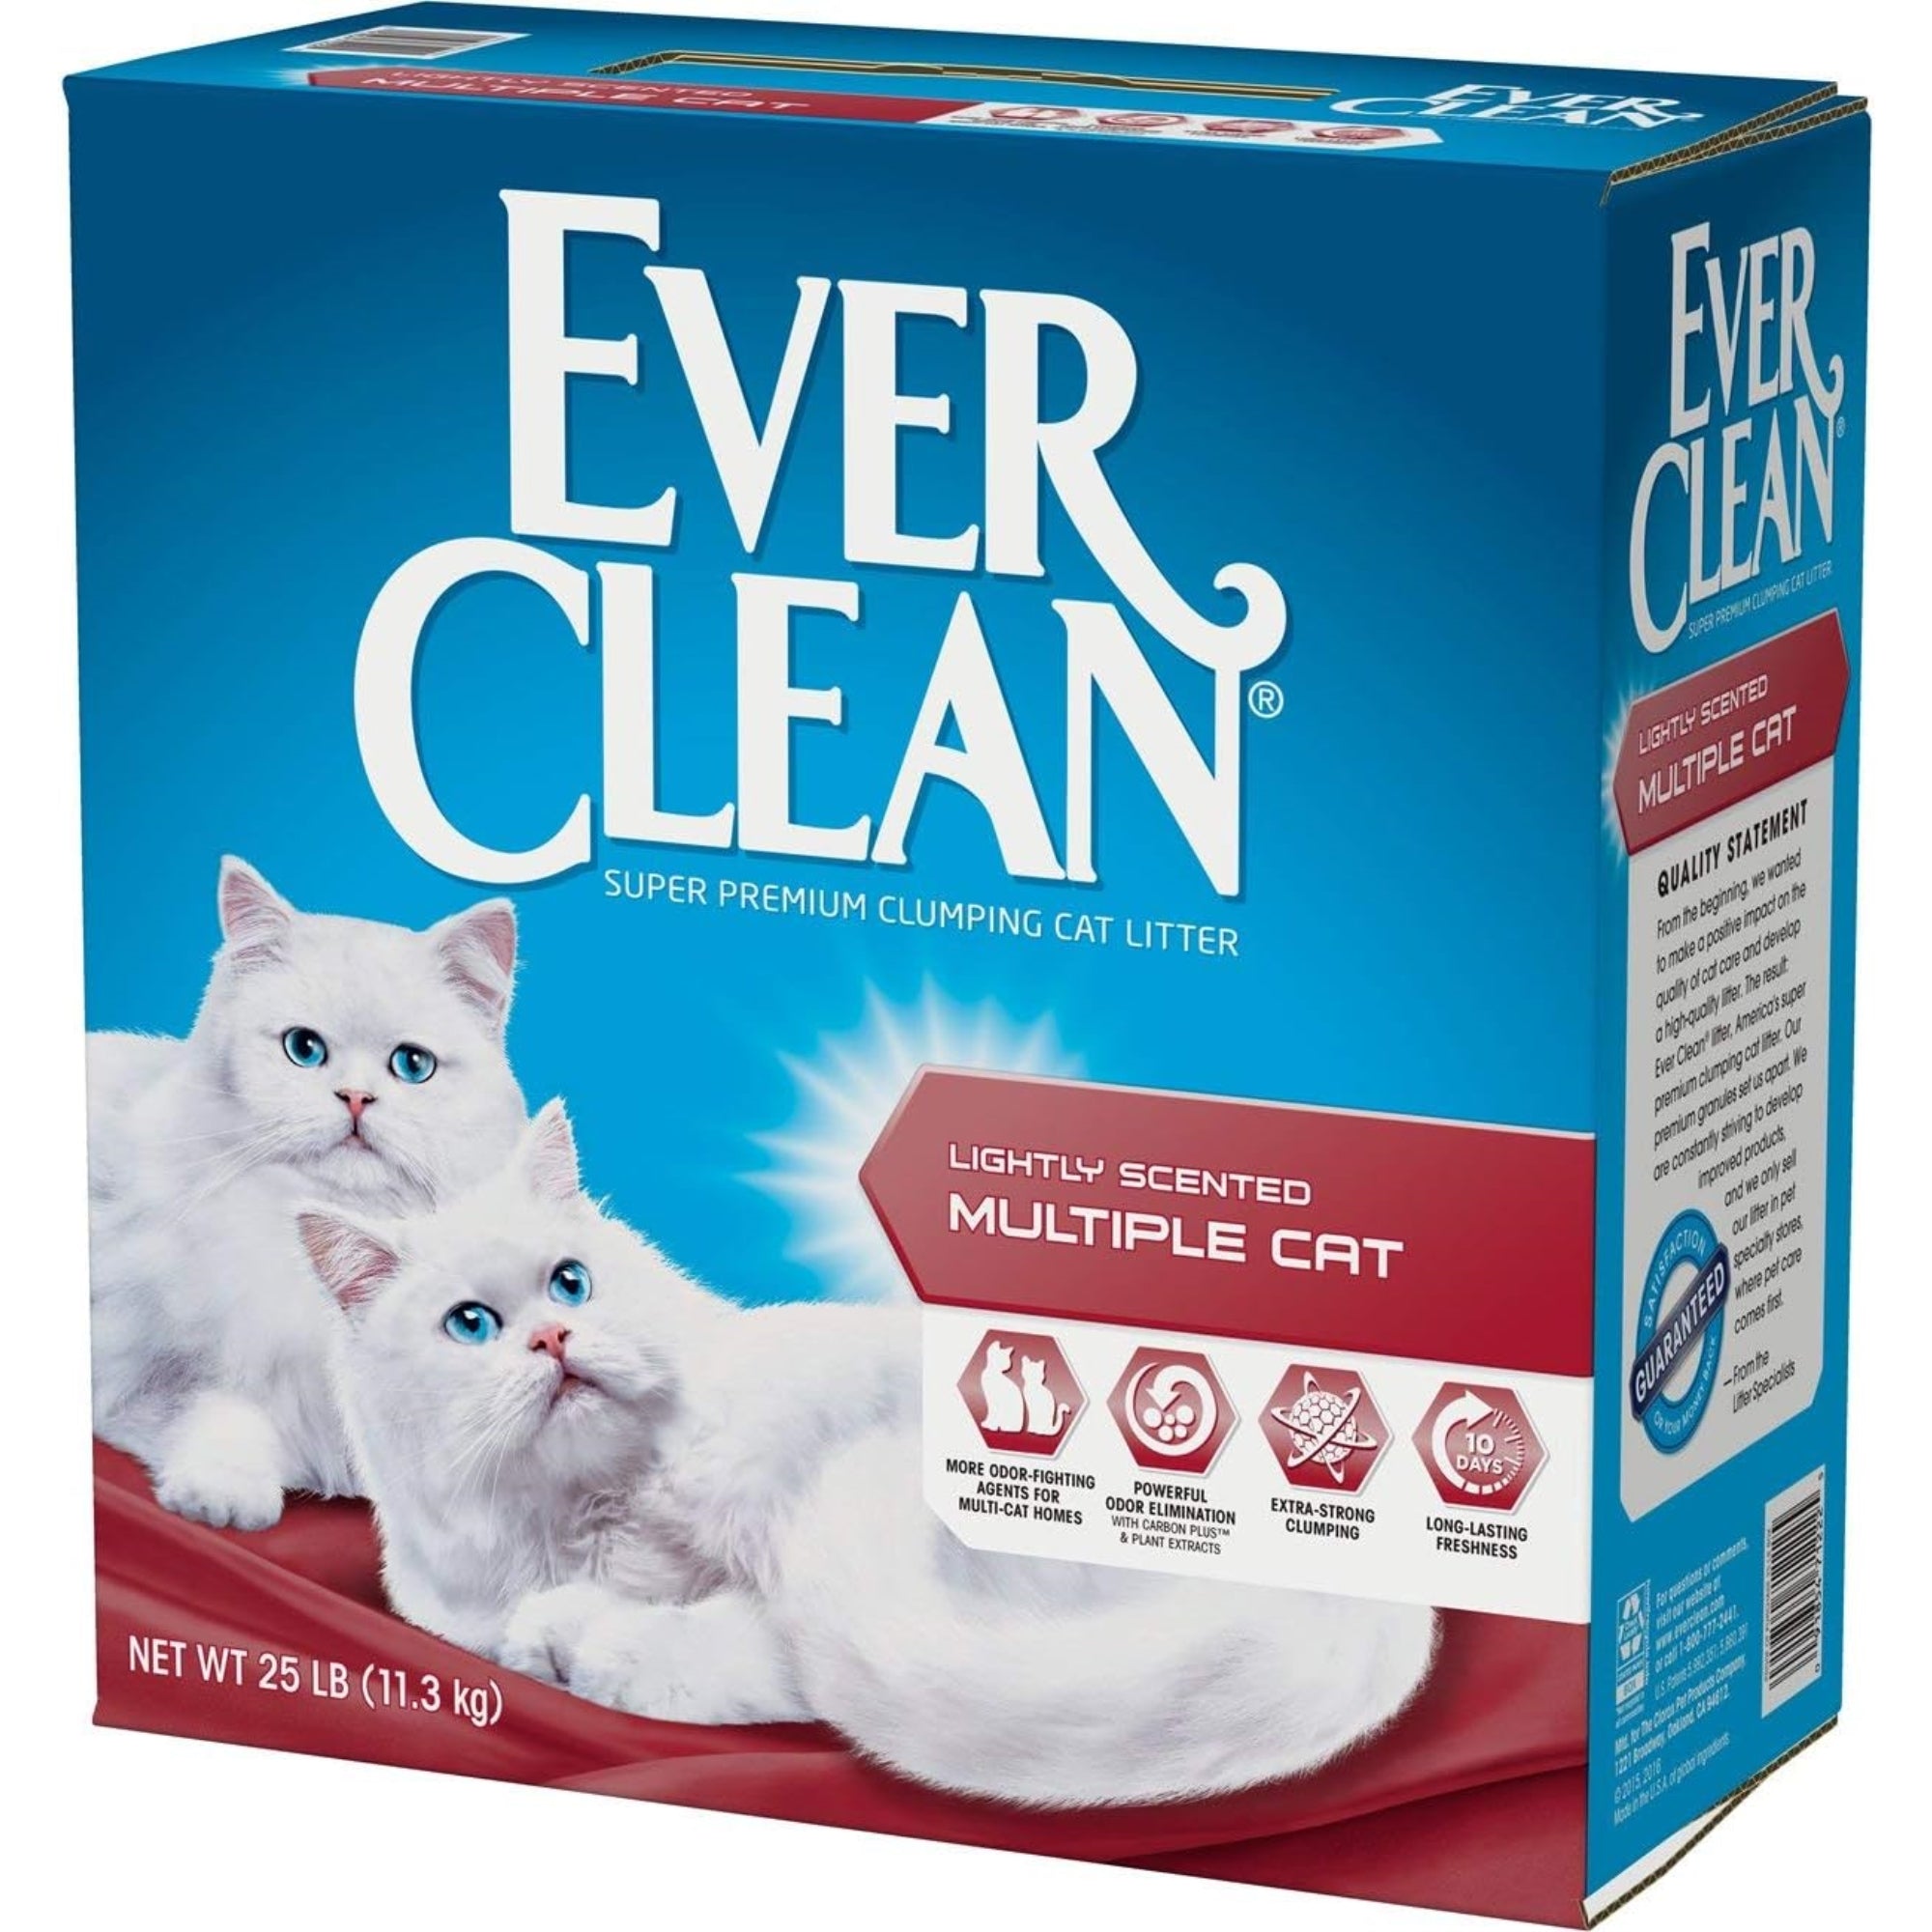 Ever Clean Lightly-Scented Multiple Cat Clumping Clay Litter, 25lb Box